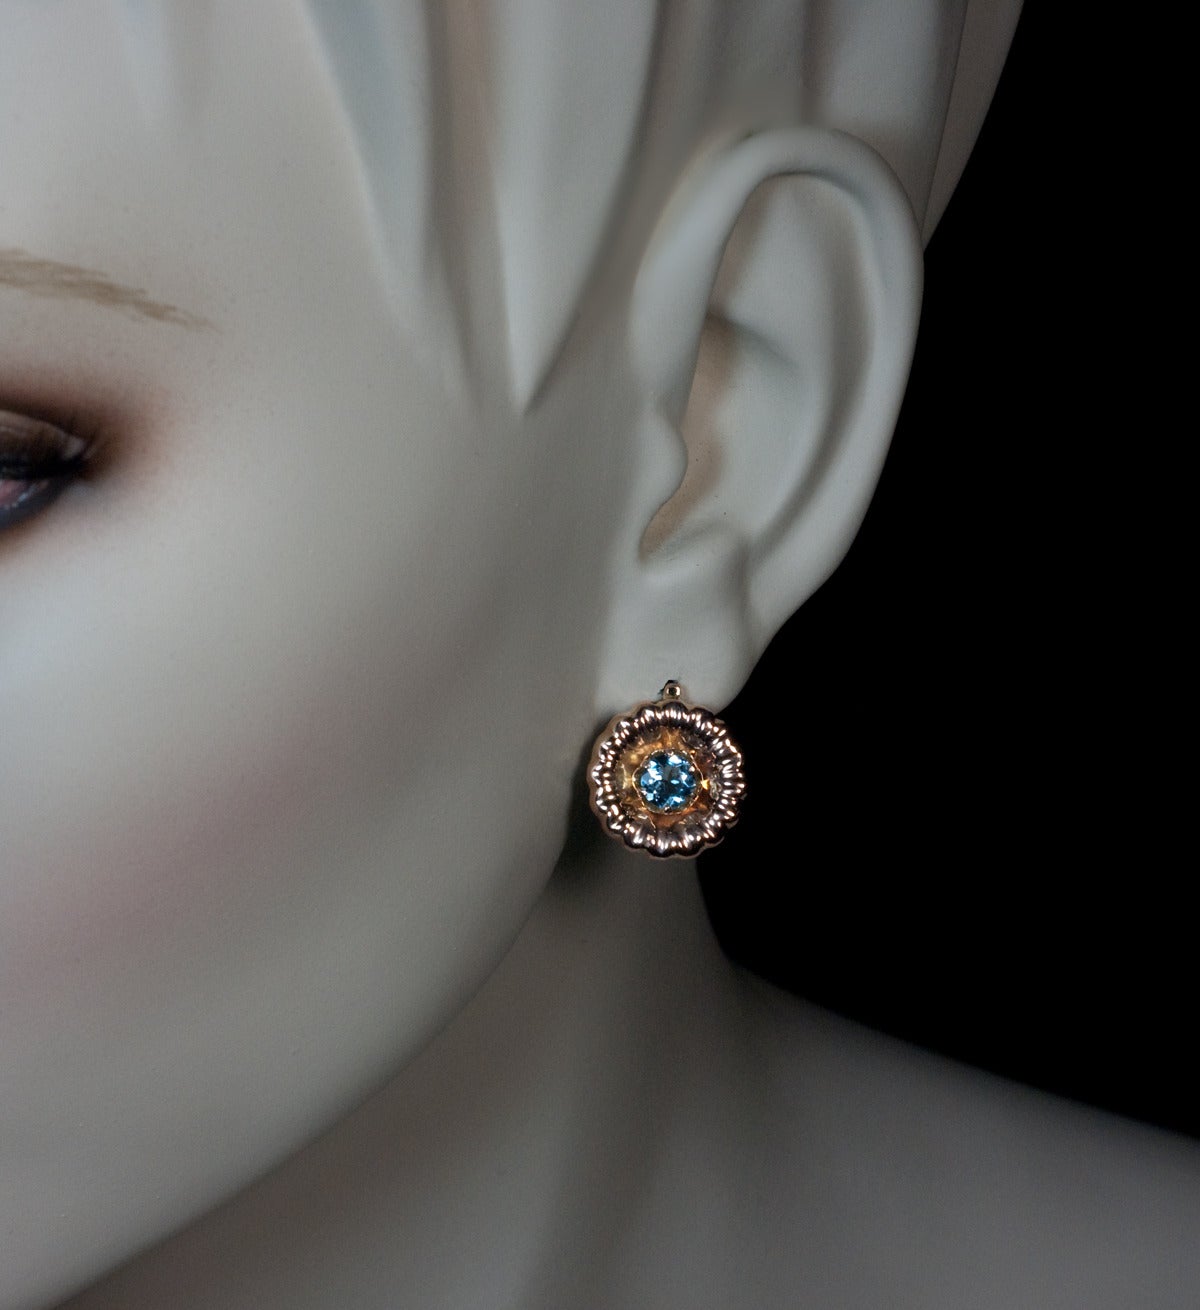 Russian, early 1900s

Designed as stylized flower heads centered with prong-set round aquamarines

14K rose gold, marked with maker's initials